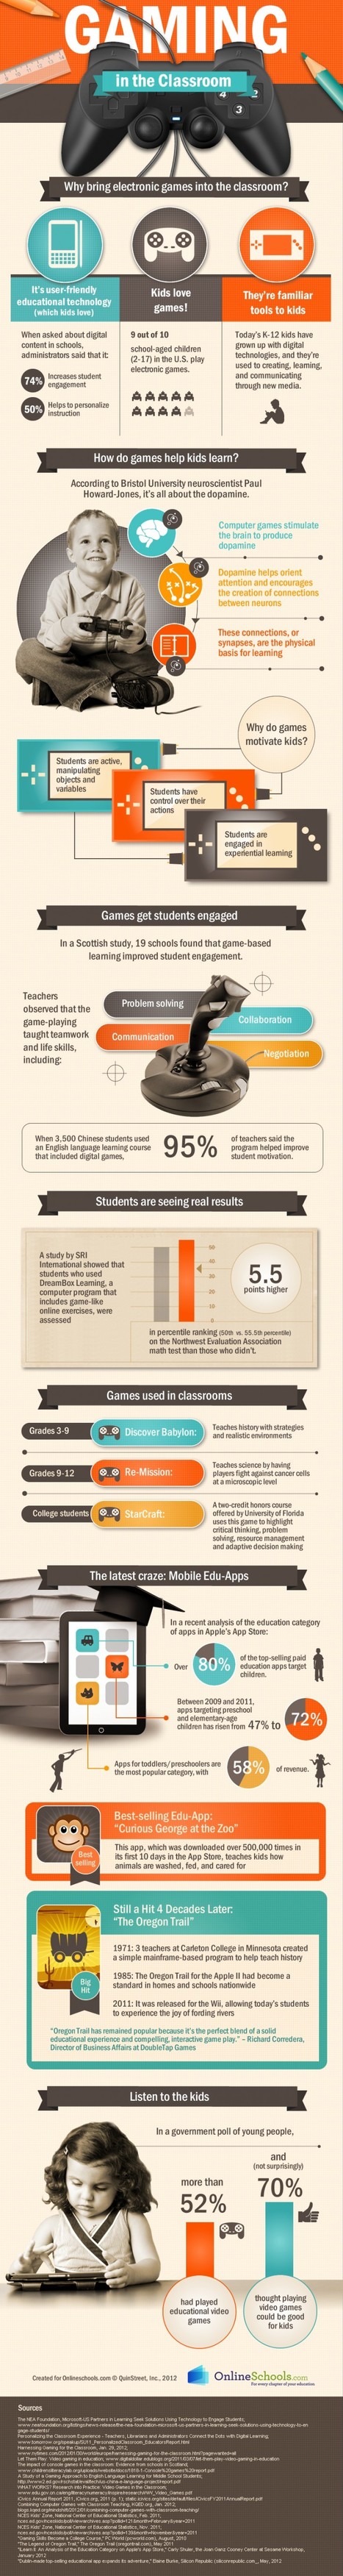 A Must-Have Guide To Gaming In The Classroom | Time to Learn | Scoop.it